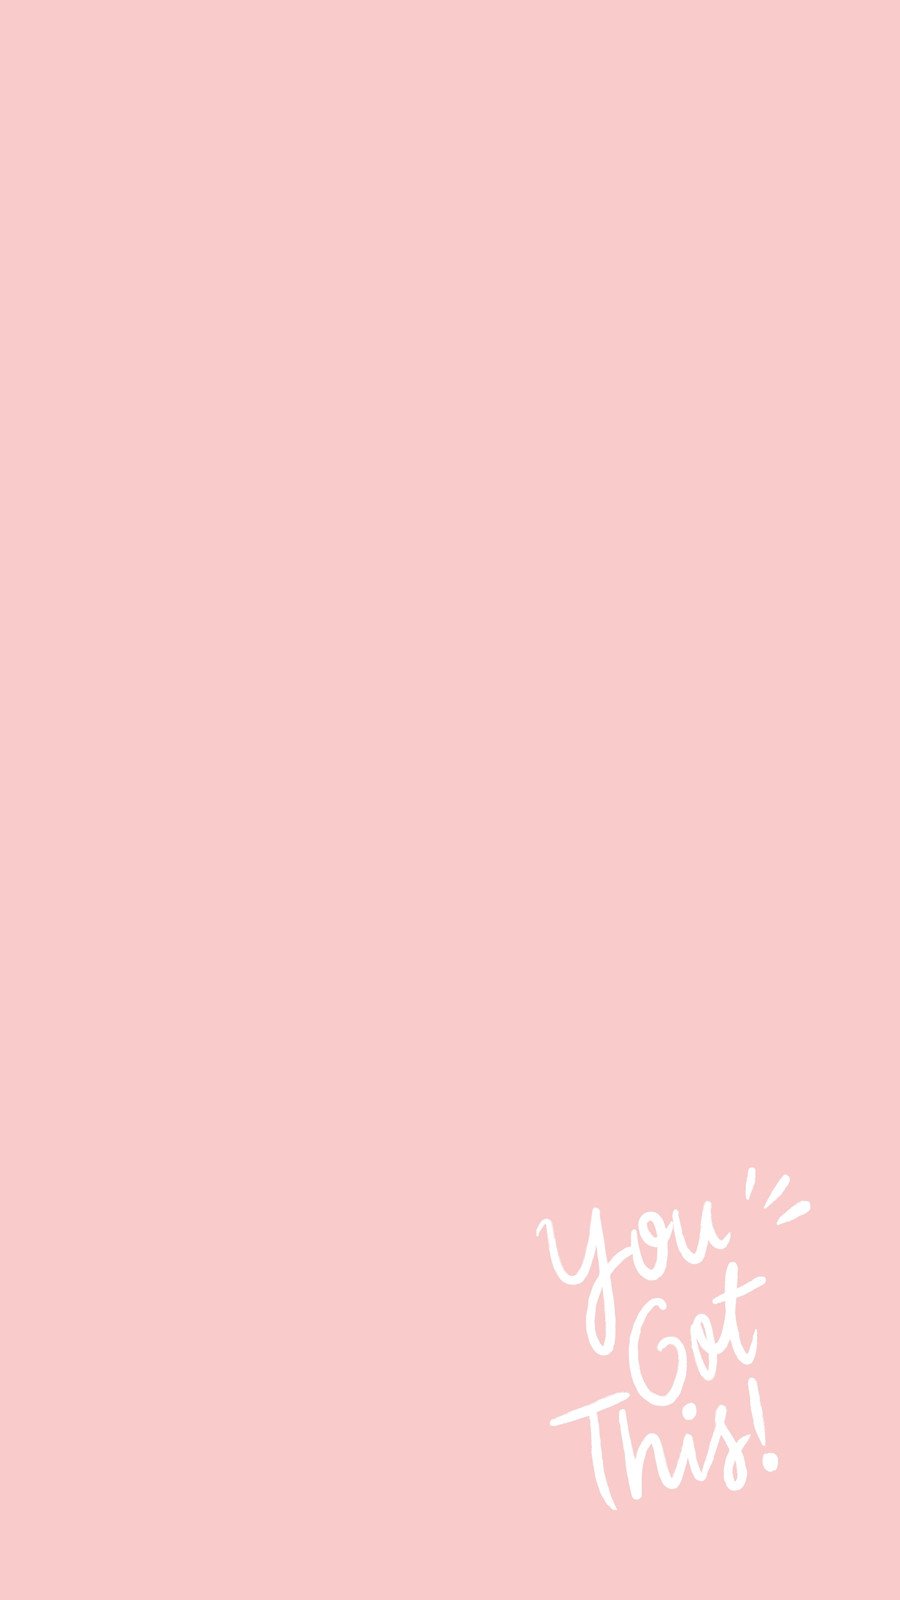 Free and customizable pink background templates